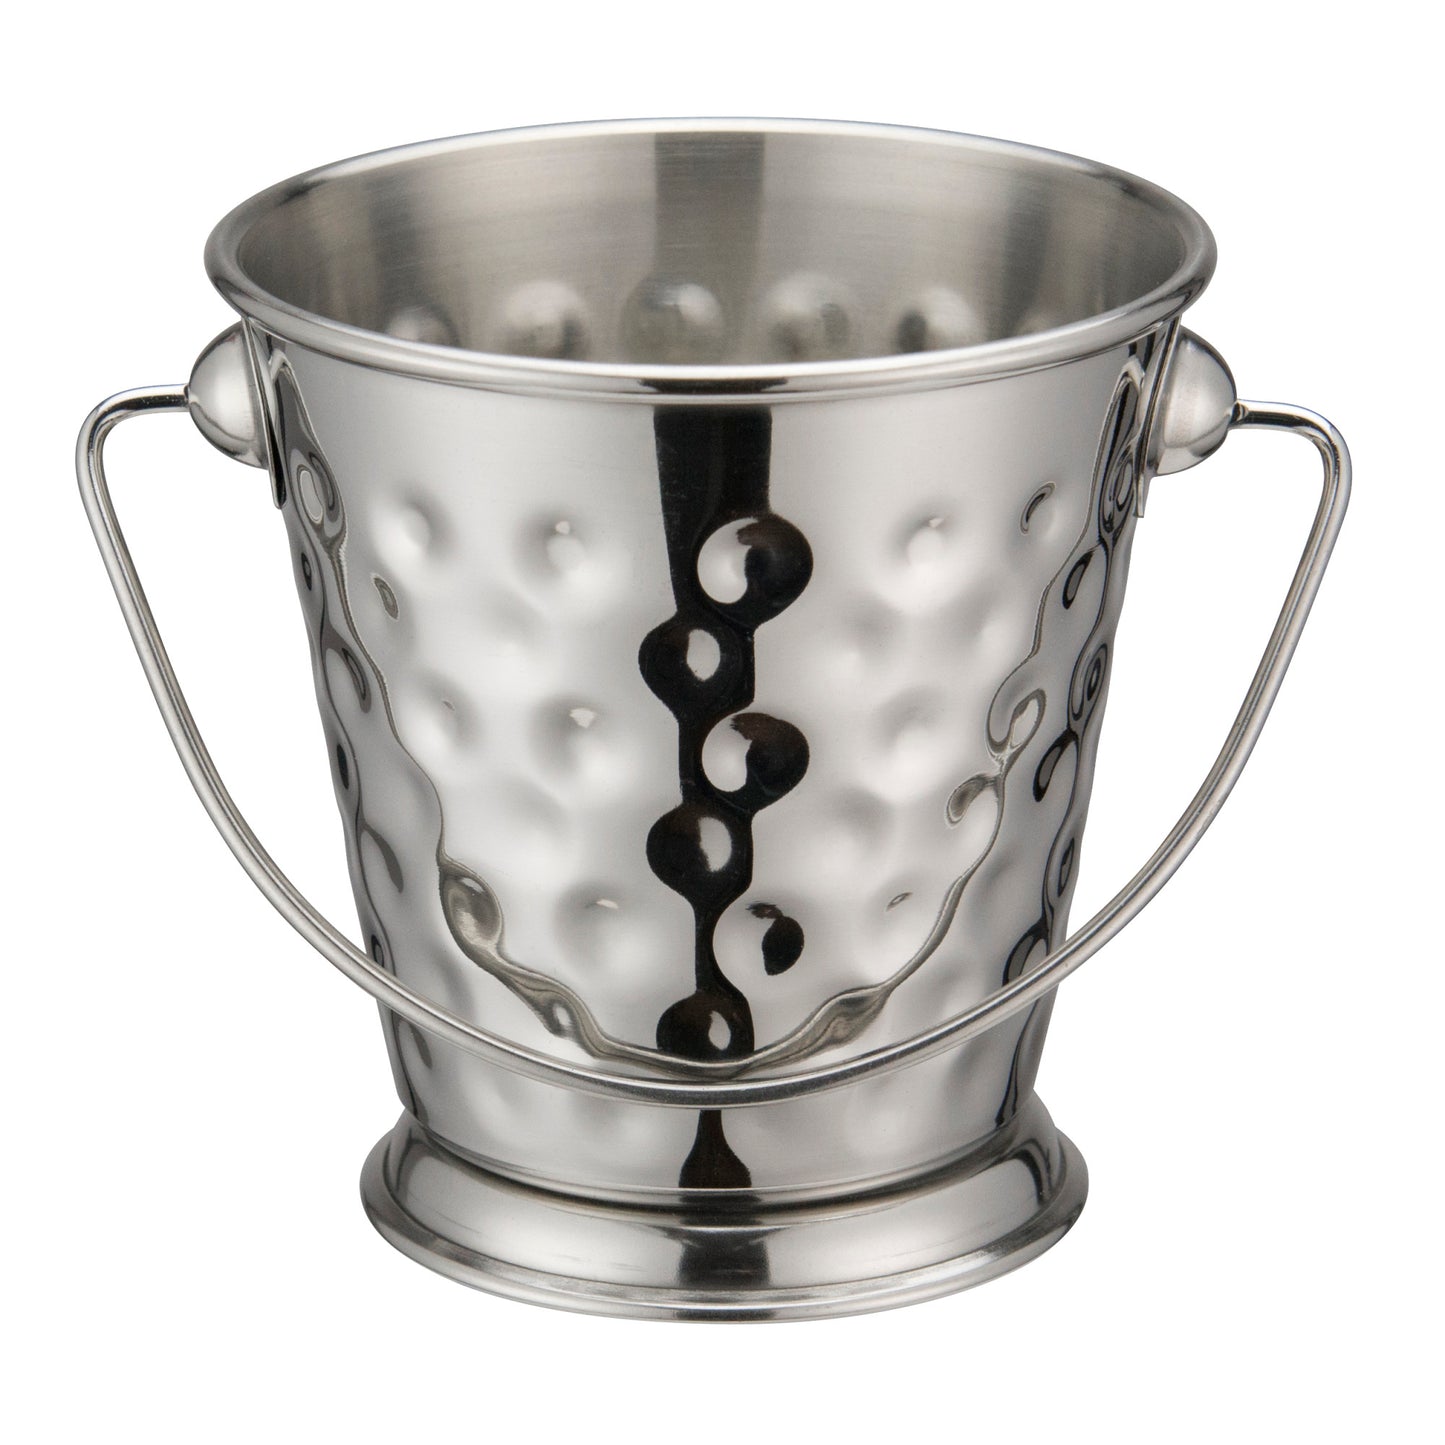 DDSA-103S - Stainless Steel Mini Pail - Hammered, 5"